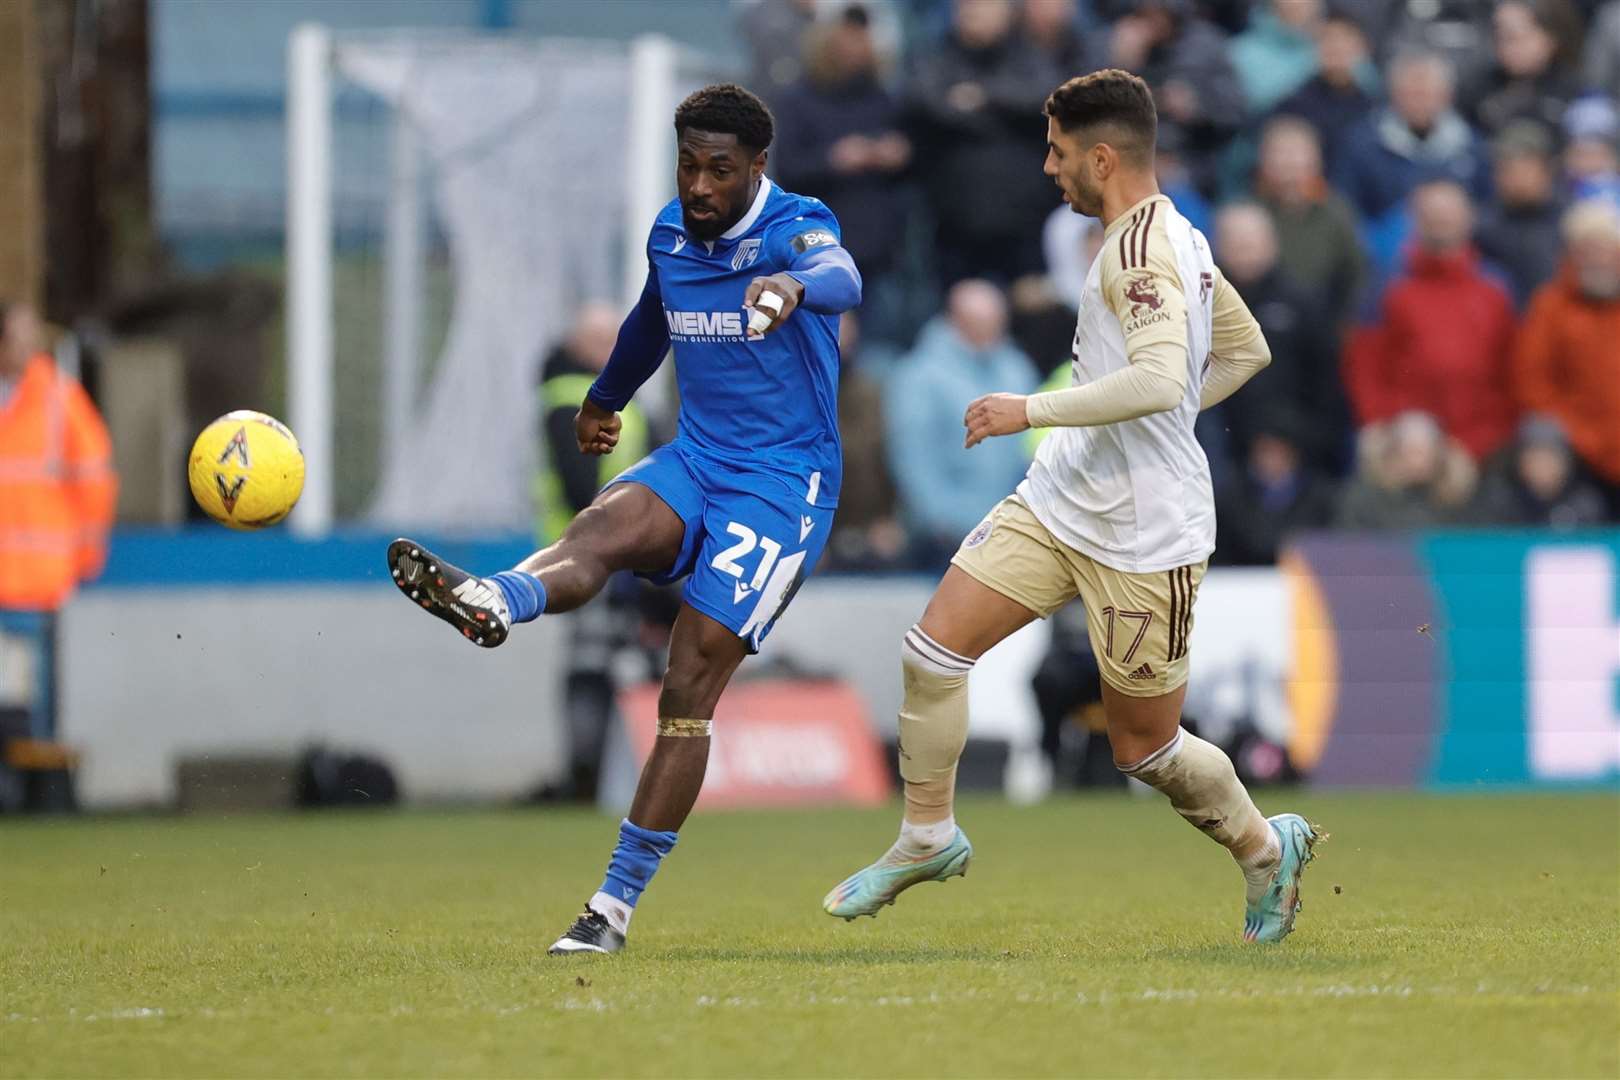 Hakeeb Adelakun in action for Gillingham in the FA Cup against Leicester City